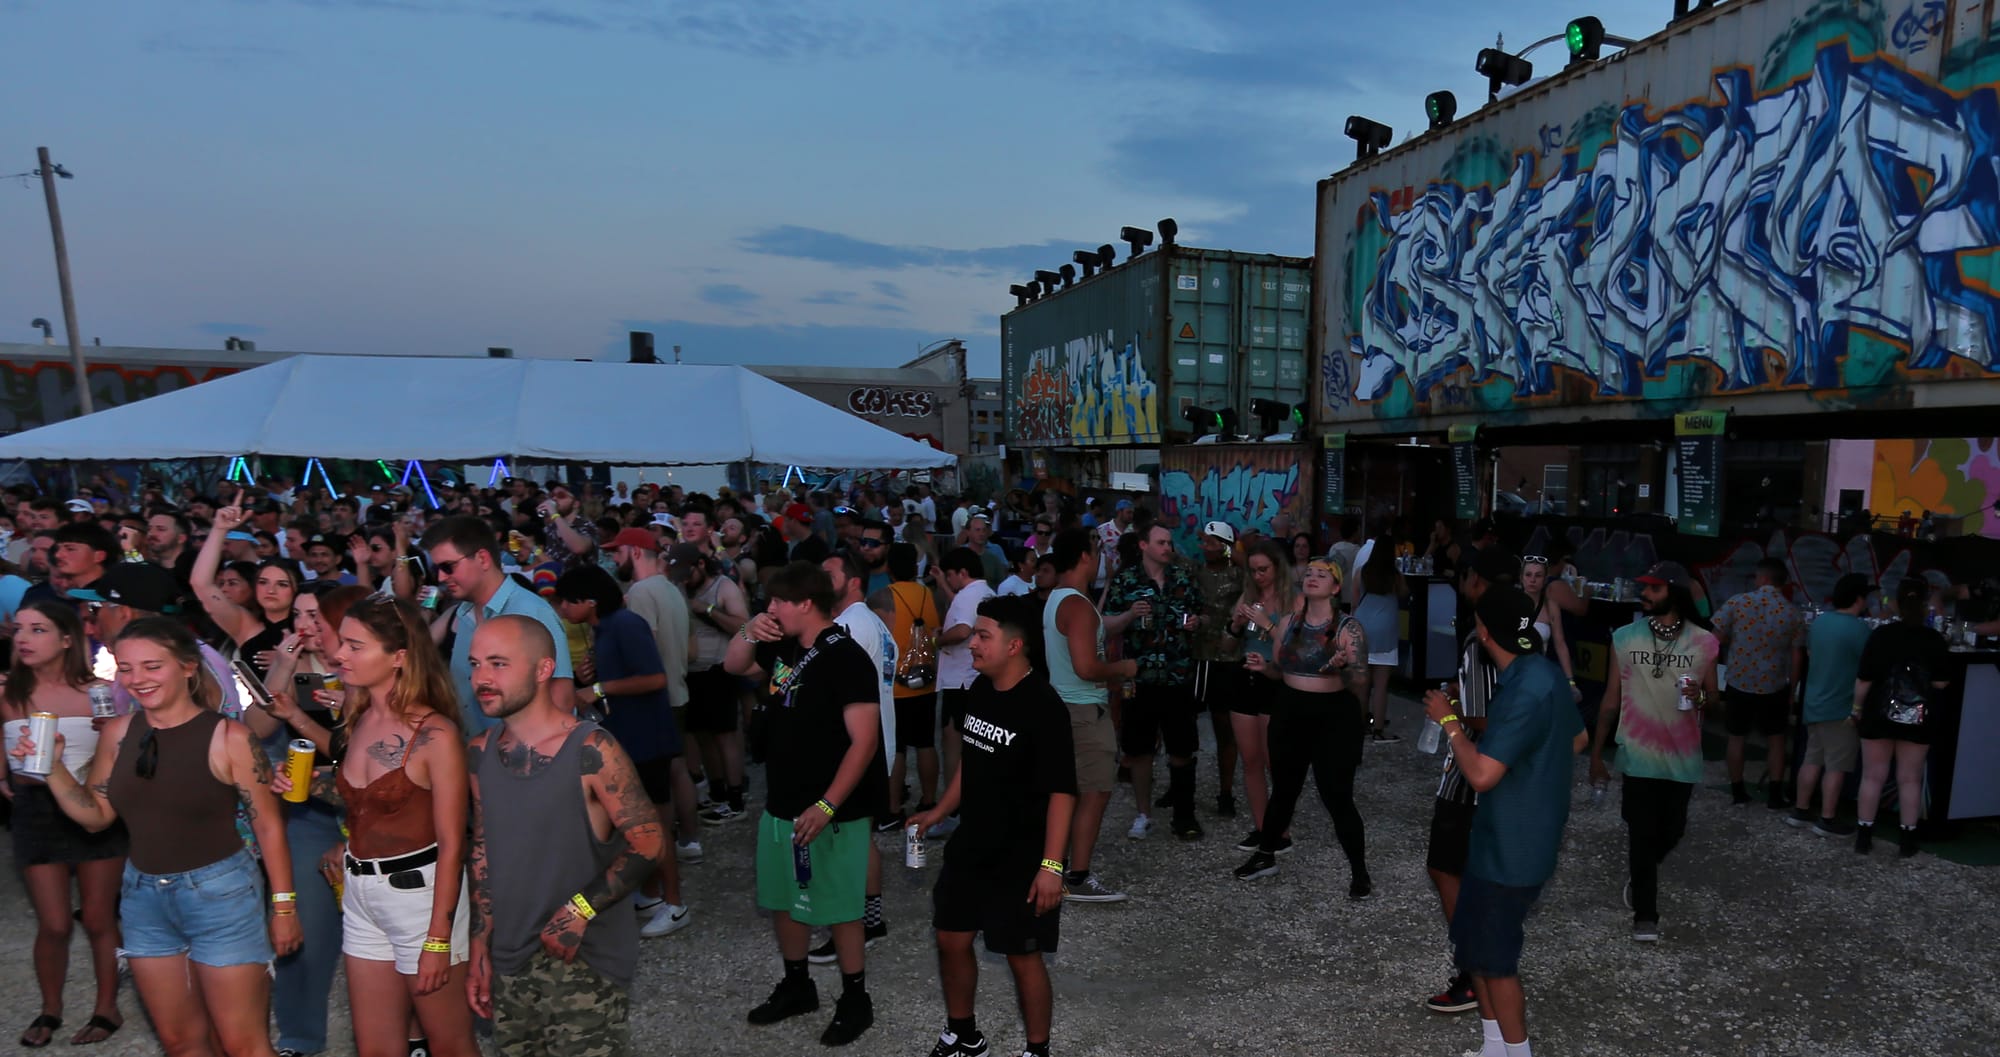 A sense of possibility grounded in local creativity: reviewing the visual art at Elsewhere Fest